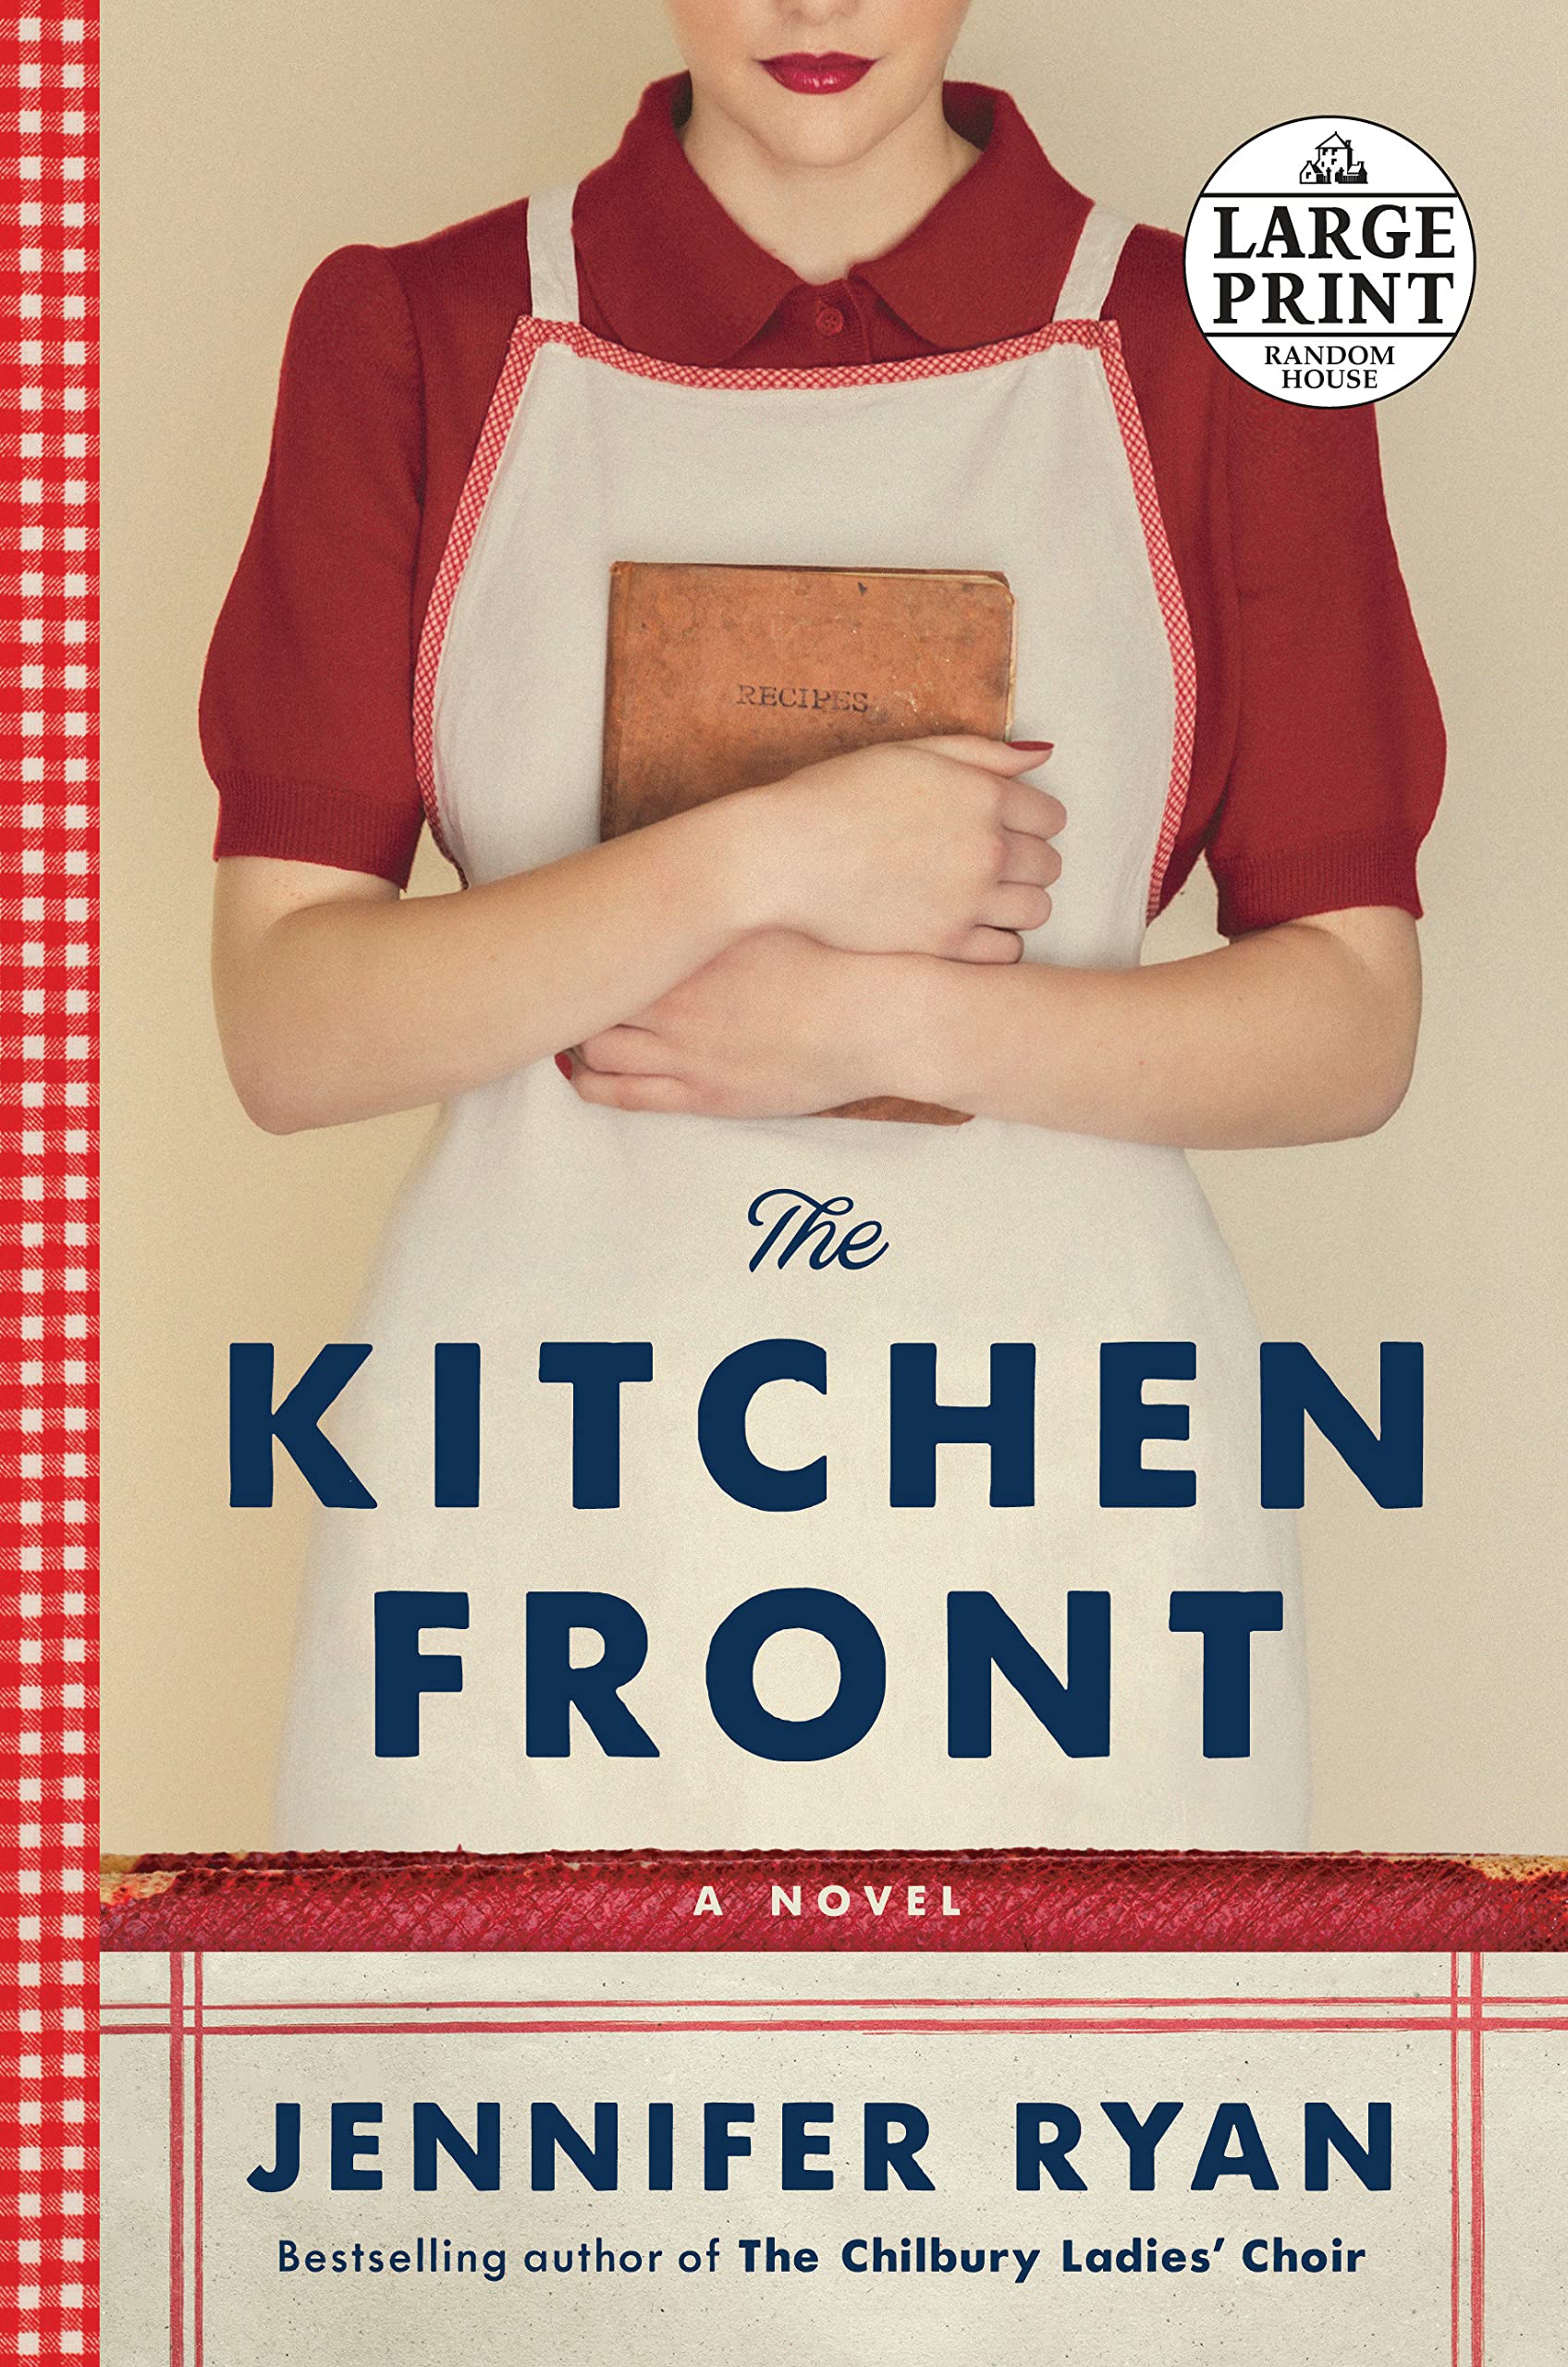 Image of a woman in a red shirt, red lipstick, and a white apron holding a cookbook across her chest. Red gingham boarder